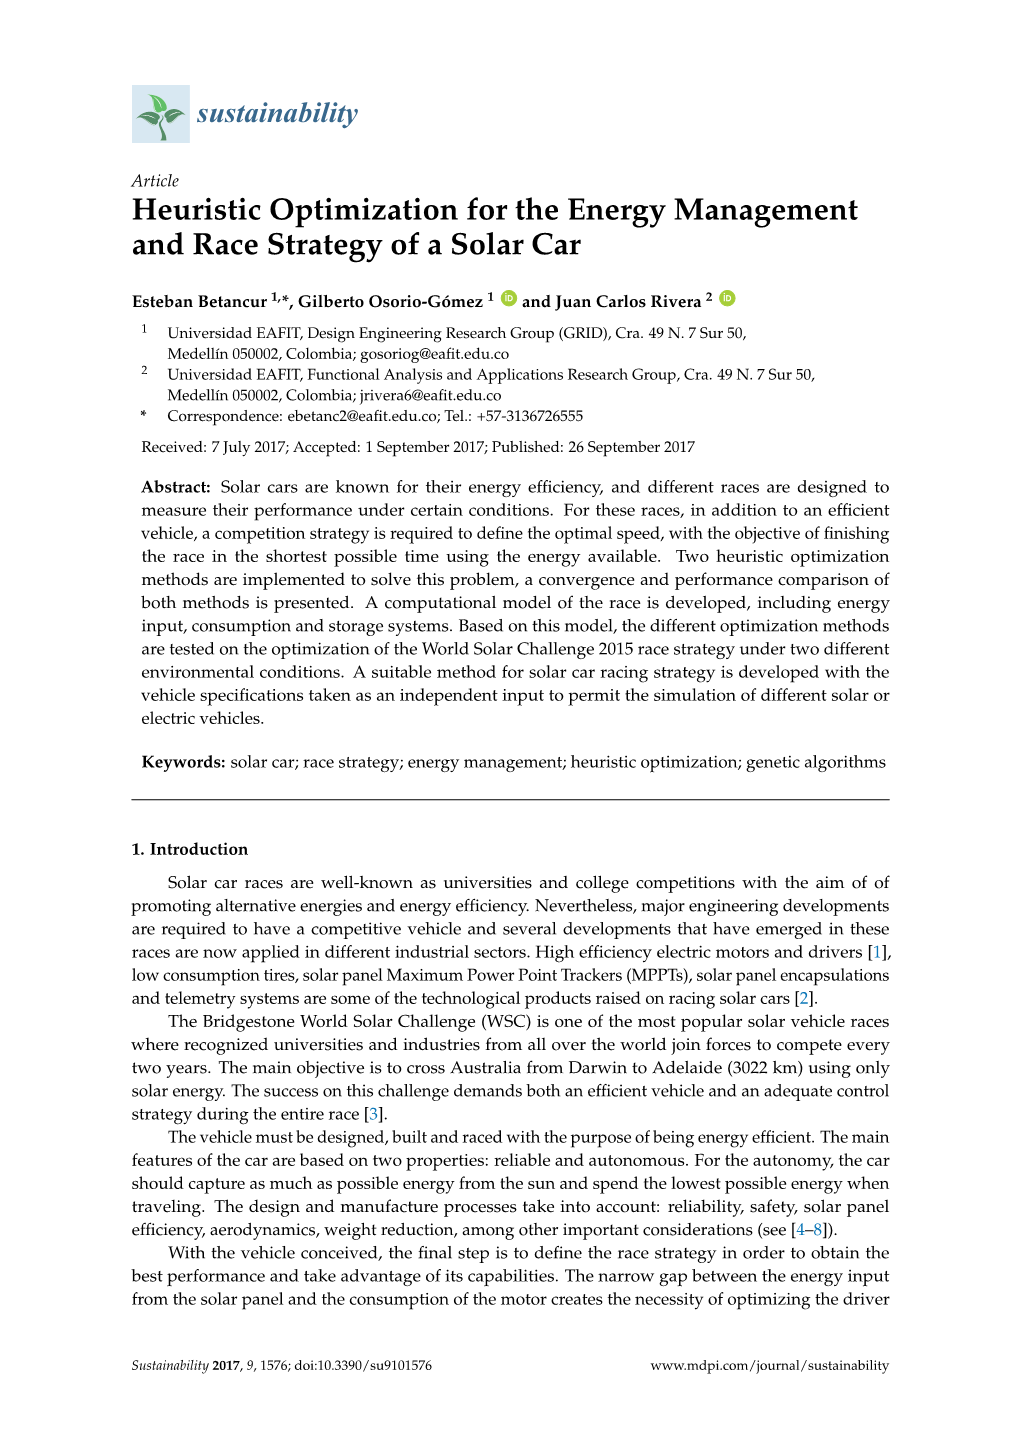 Heuristic Optimization for the Energy Management and Race Strategy of a Solar Car